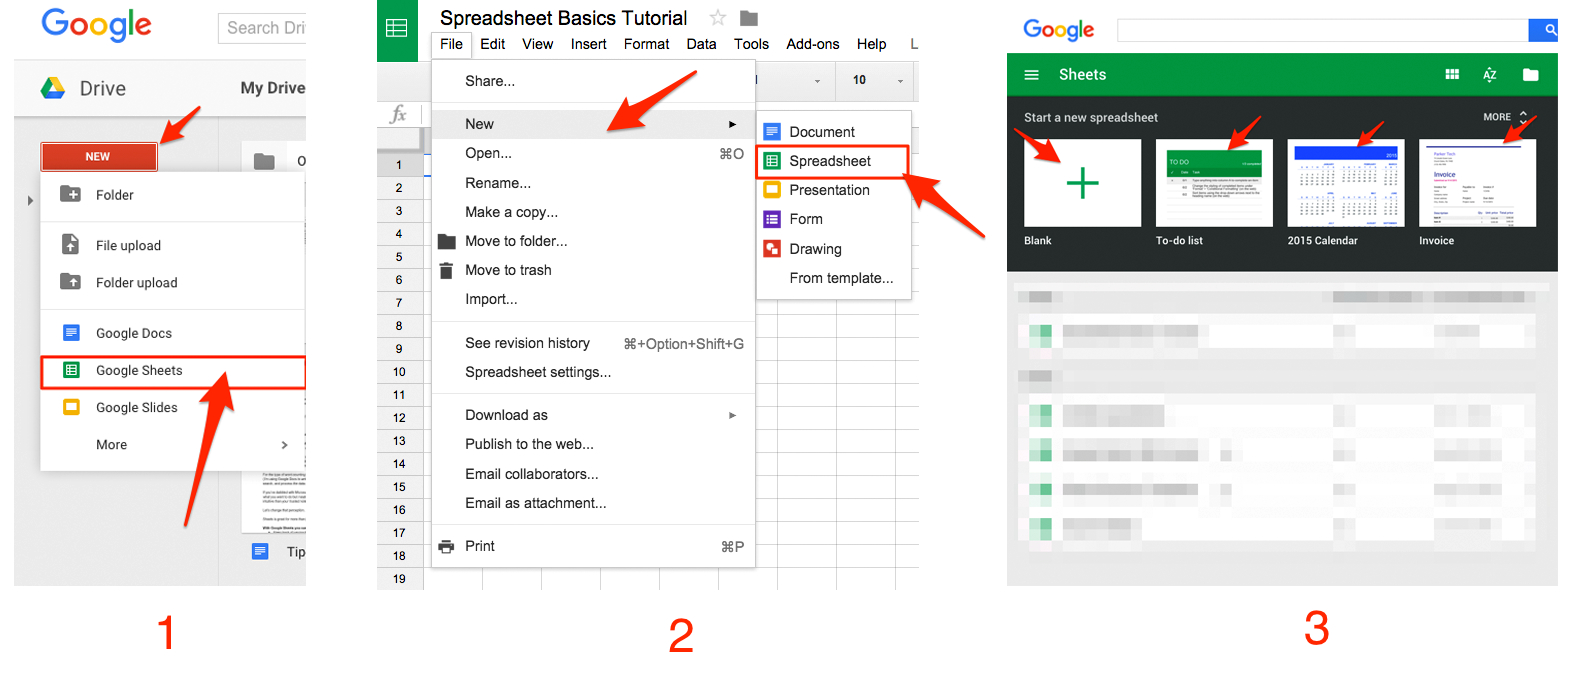 Create My Own Spreadsheet Throughout Google Sheets 101: The Beginner's Guide To Online Spreadsheets  The